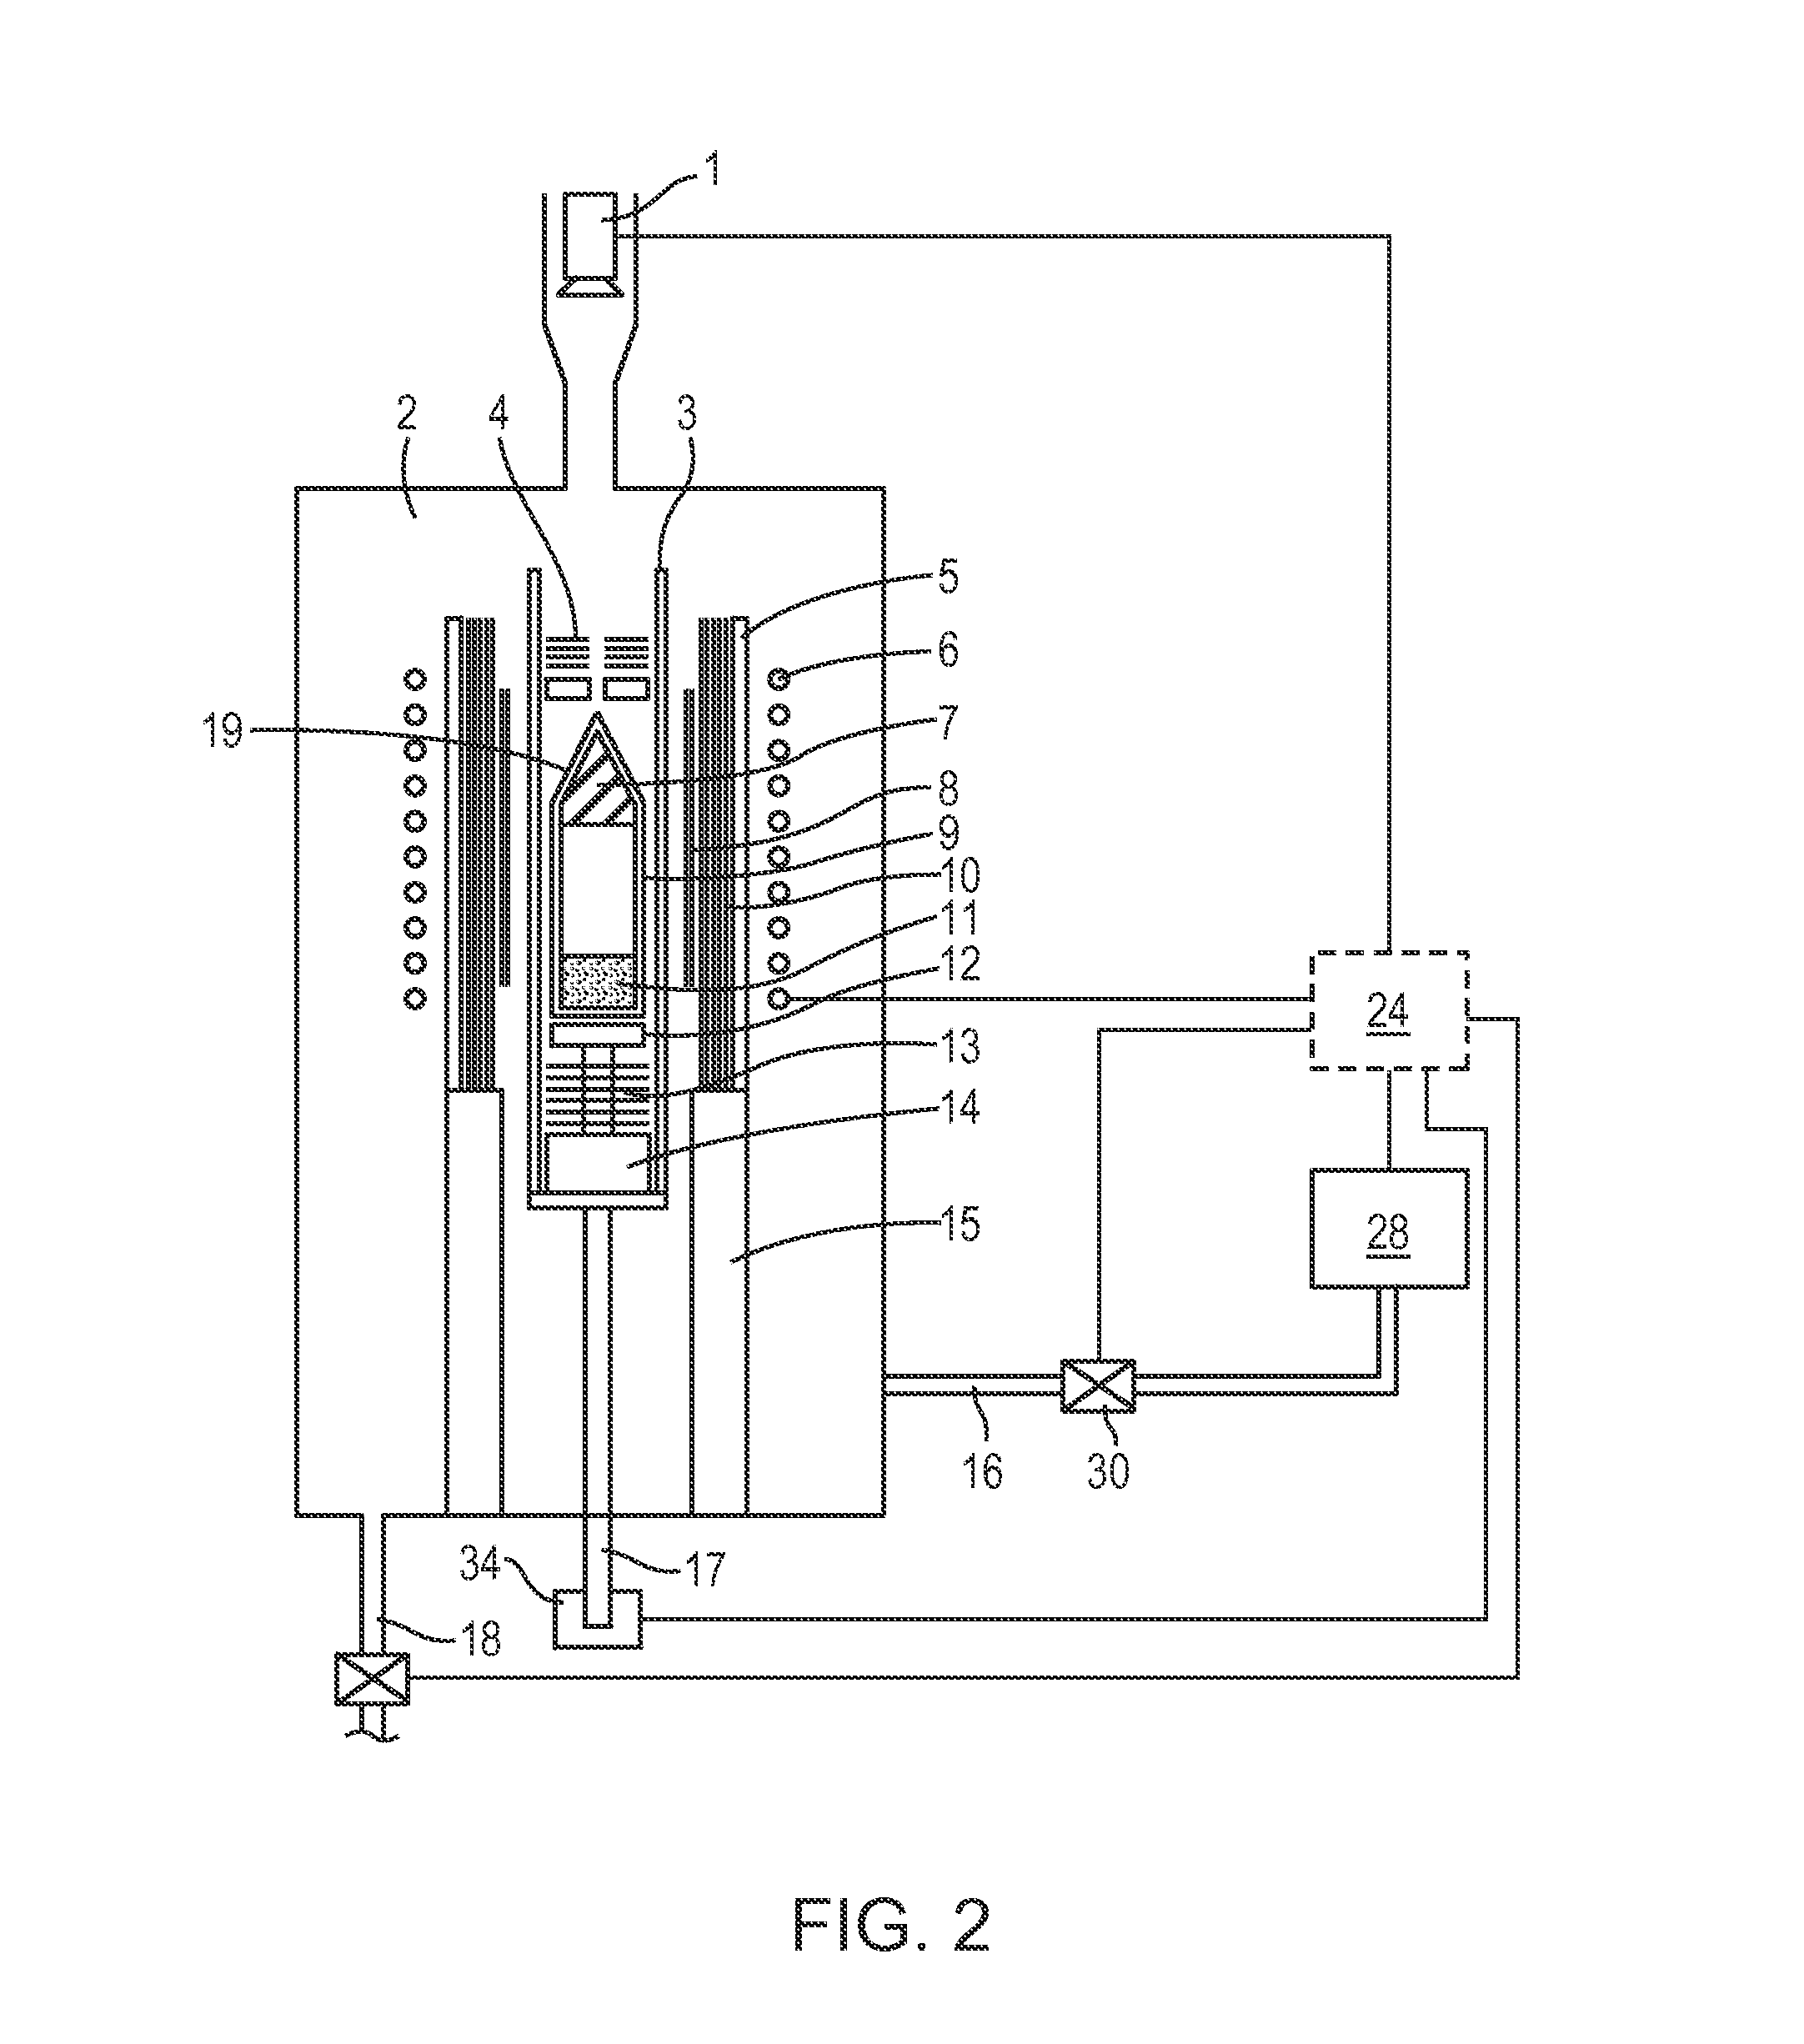 Method and apparatus for producing large, single-crystals of aluminum nitride